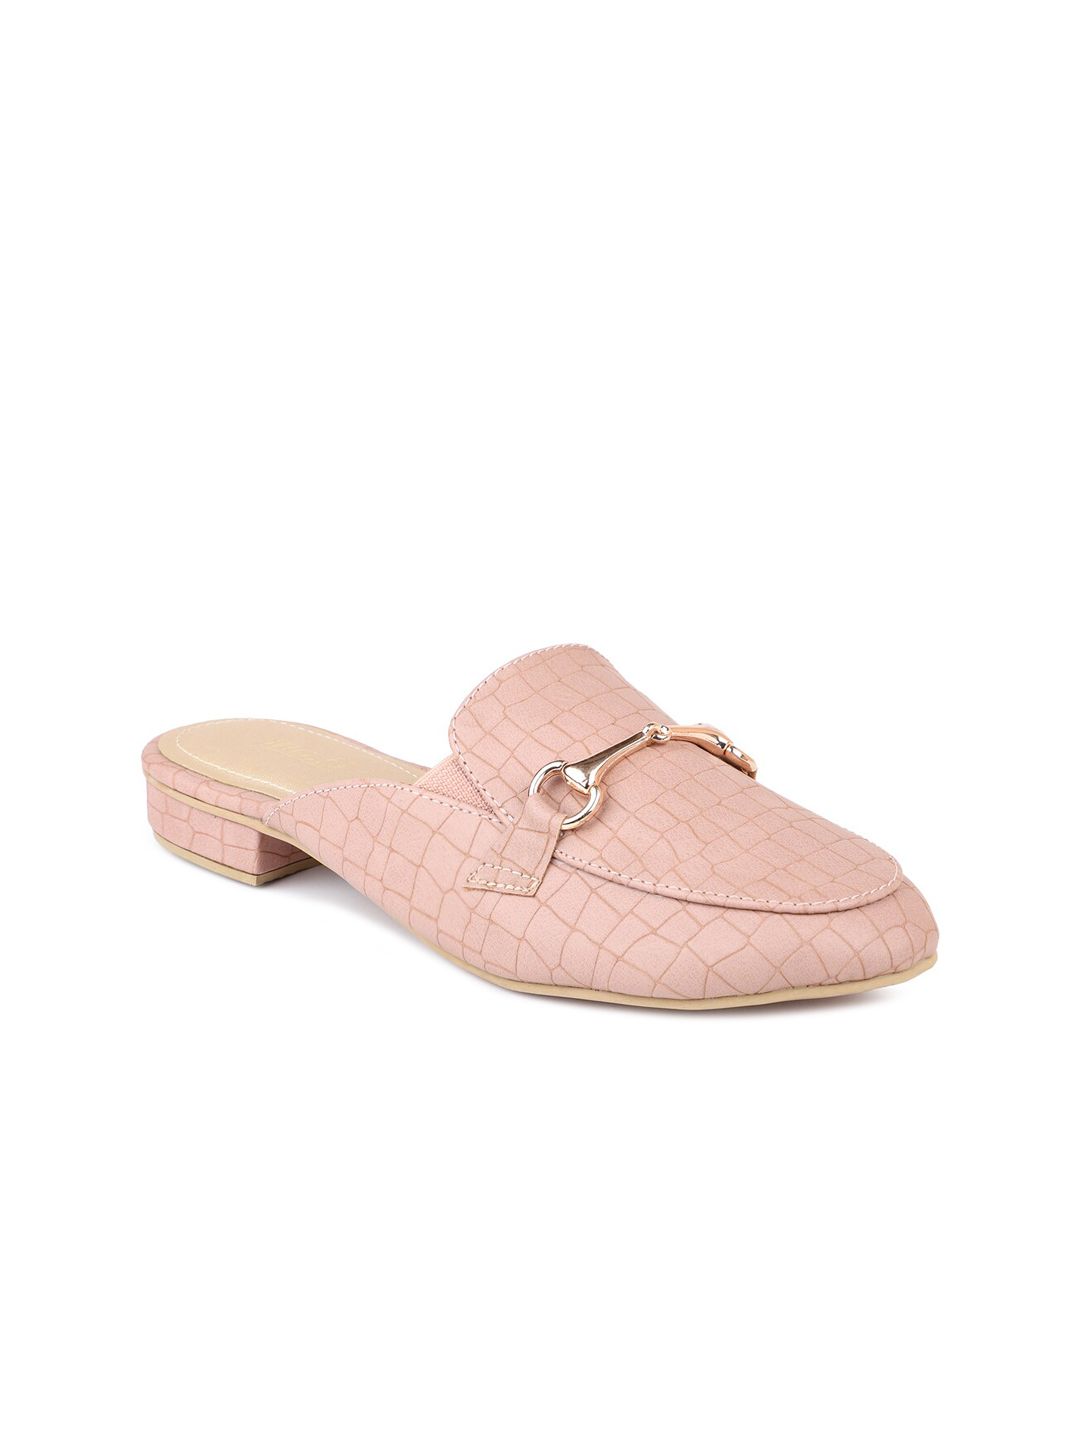 Inc 5 Women Peach-Coloured Loafers Price in India